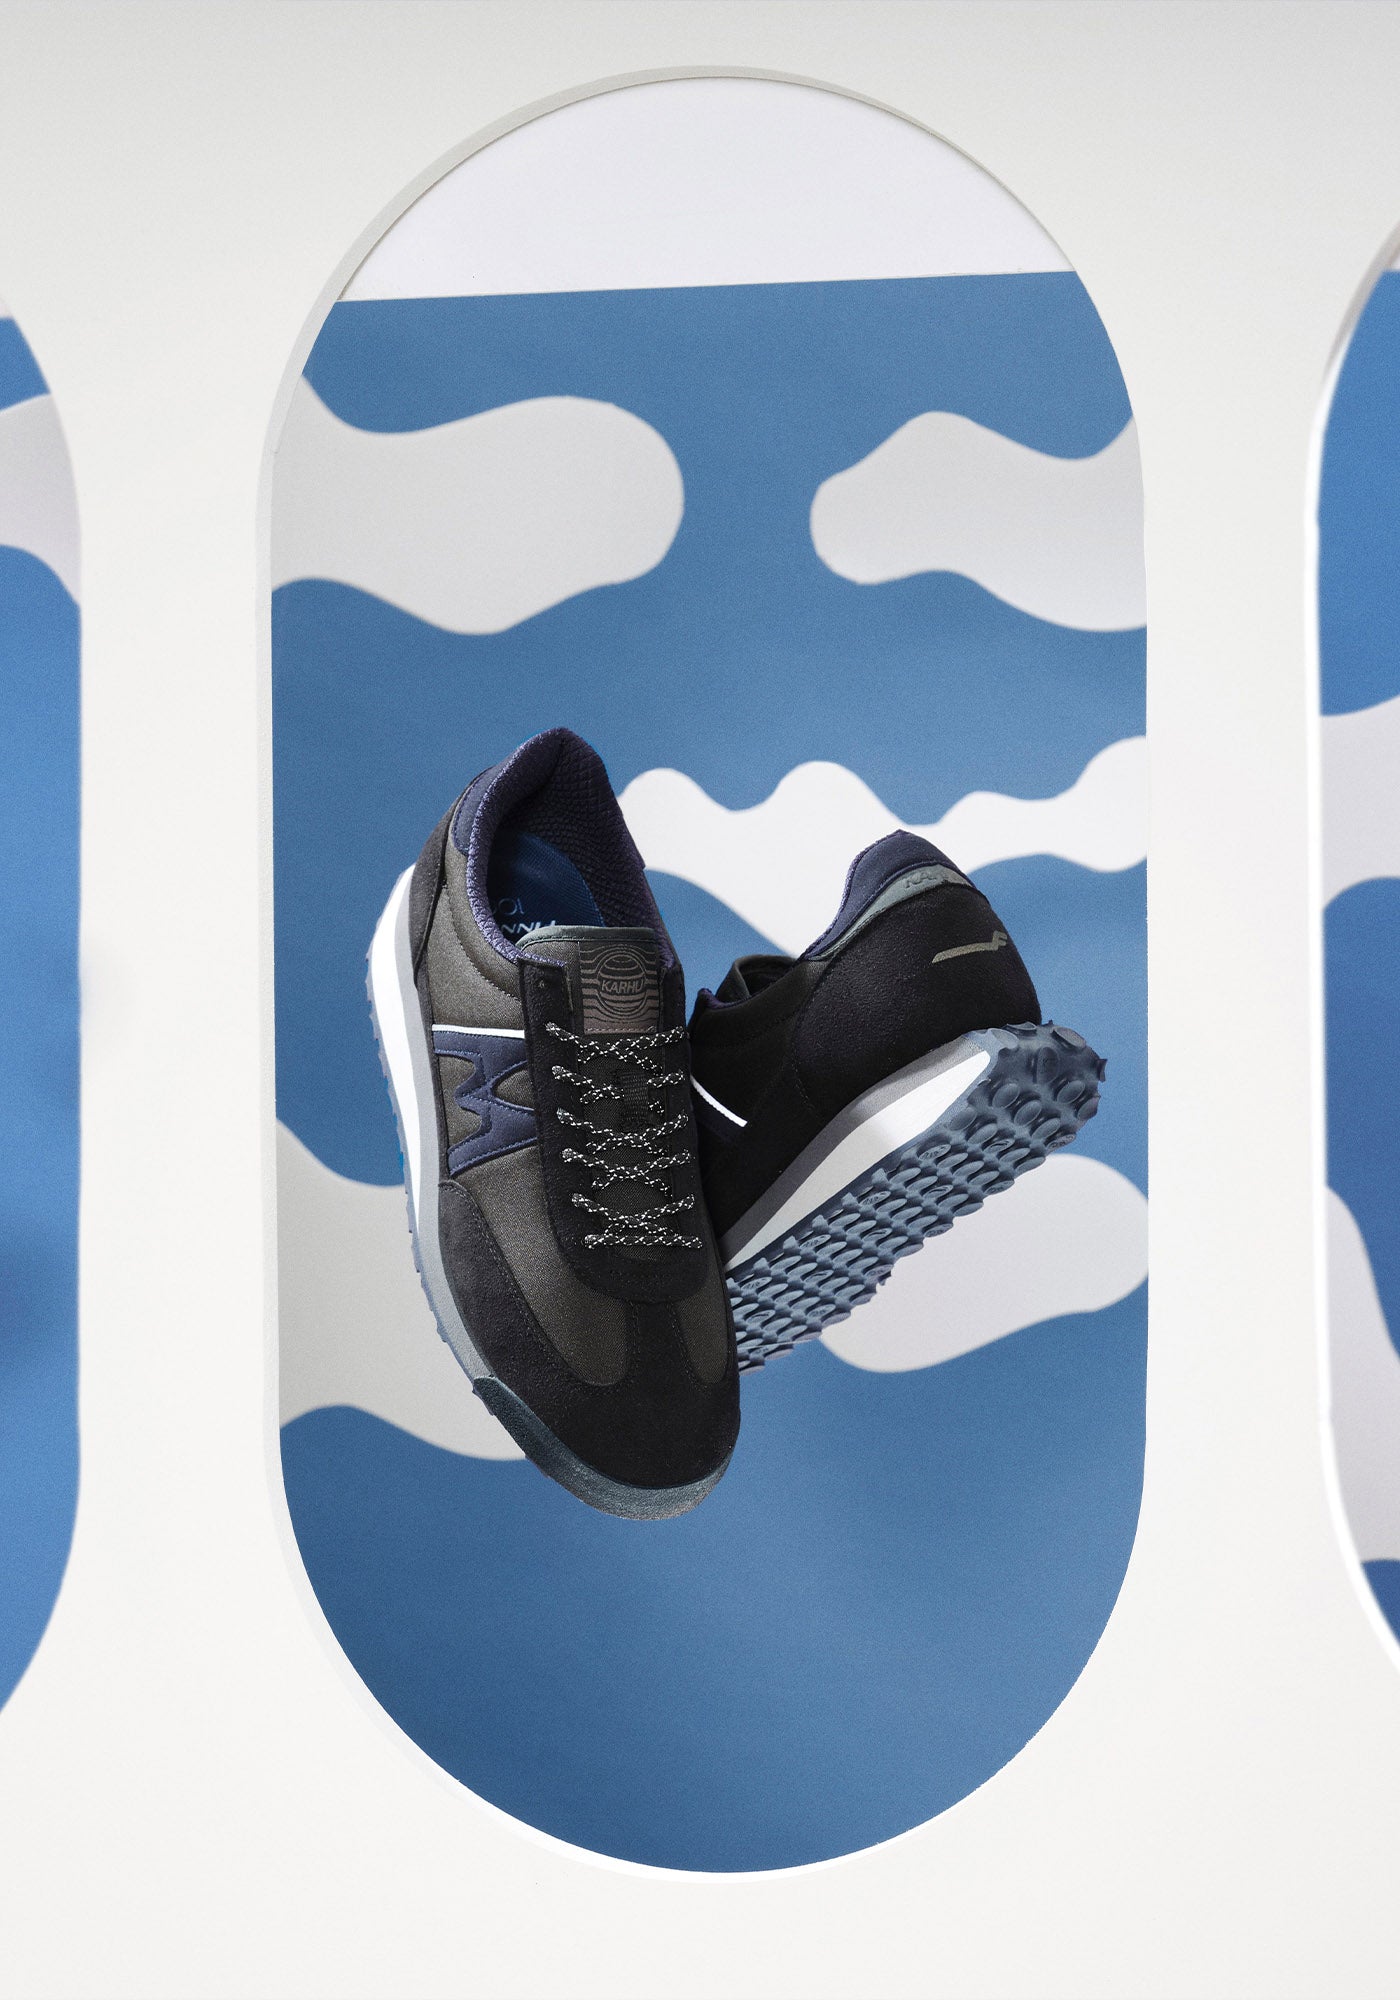 KARHU CELEBRATES 100 YEARS OF FINNAIR WITH A UNIQUE COLLABORATION